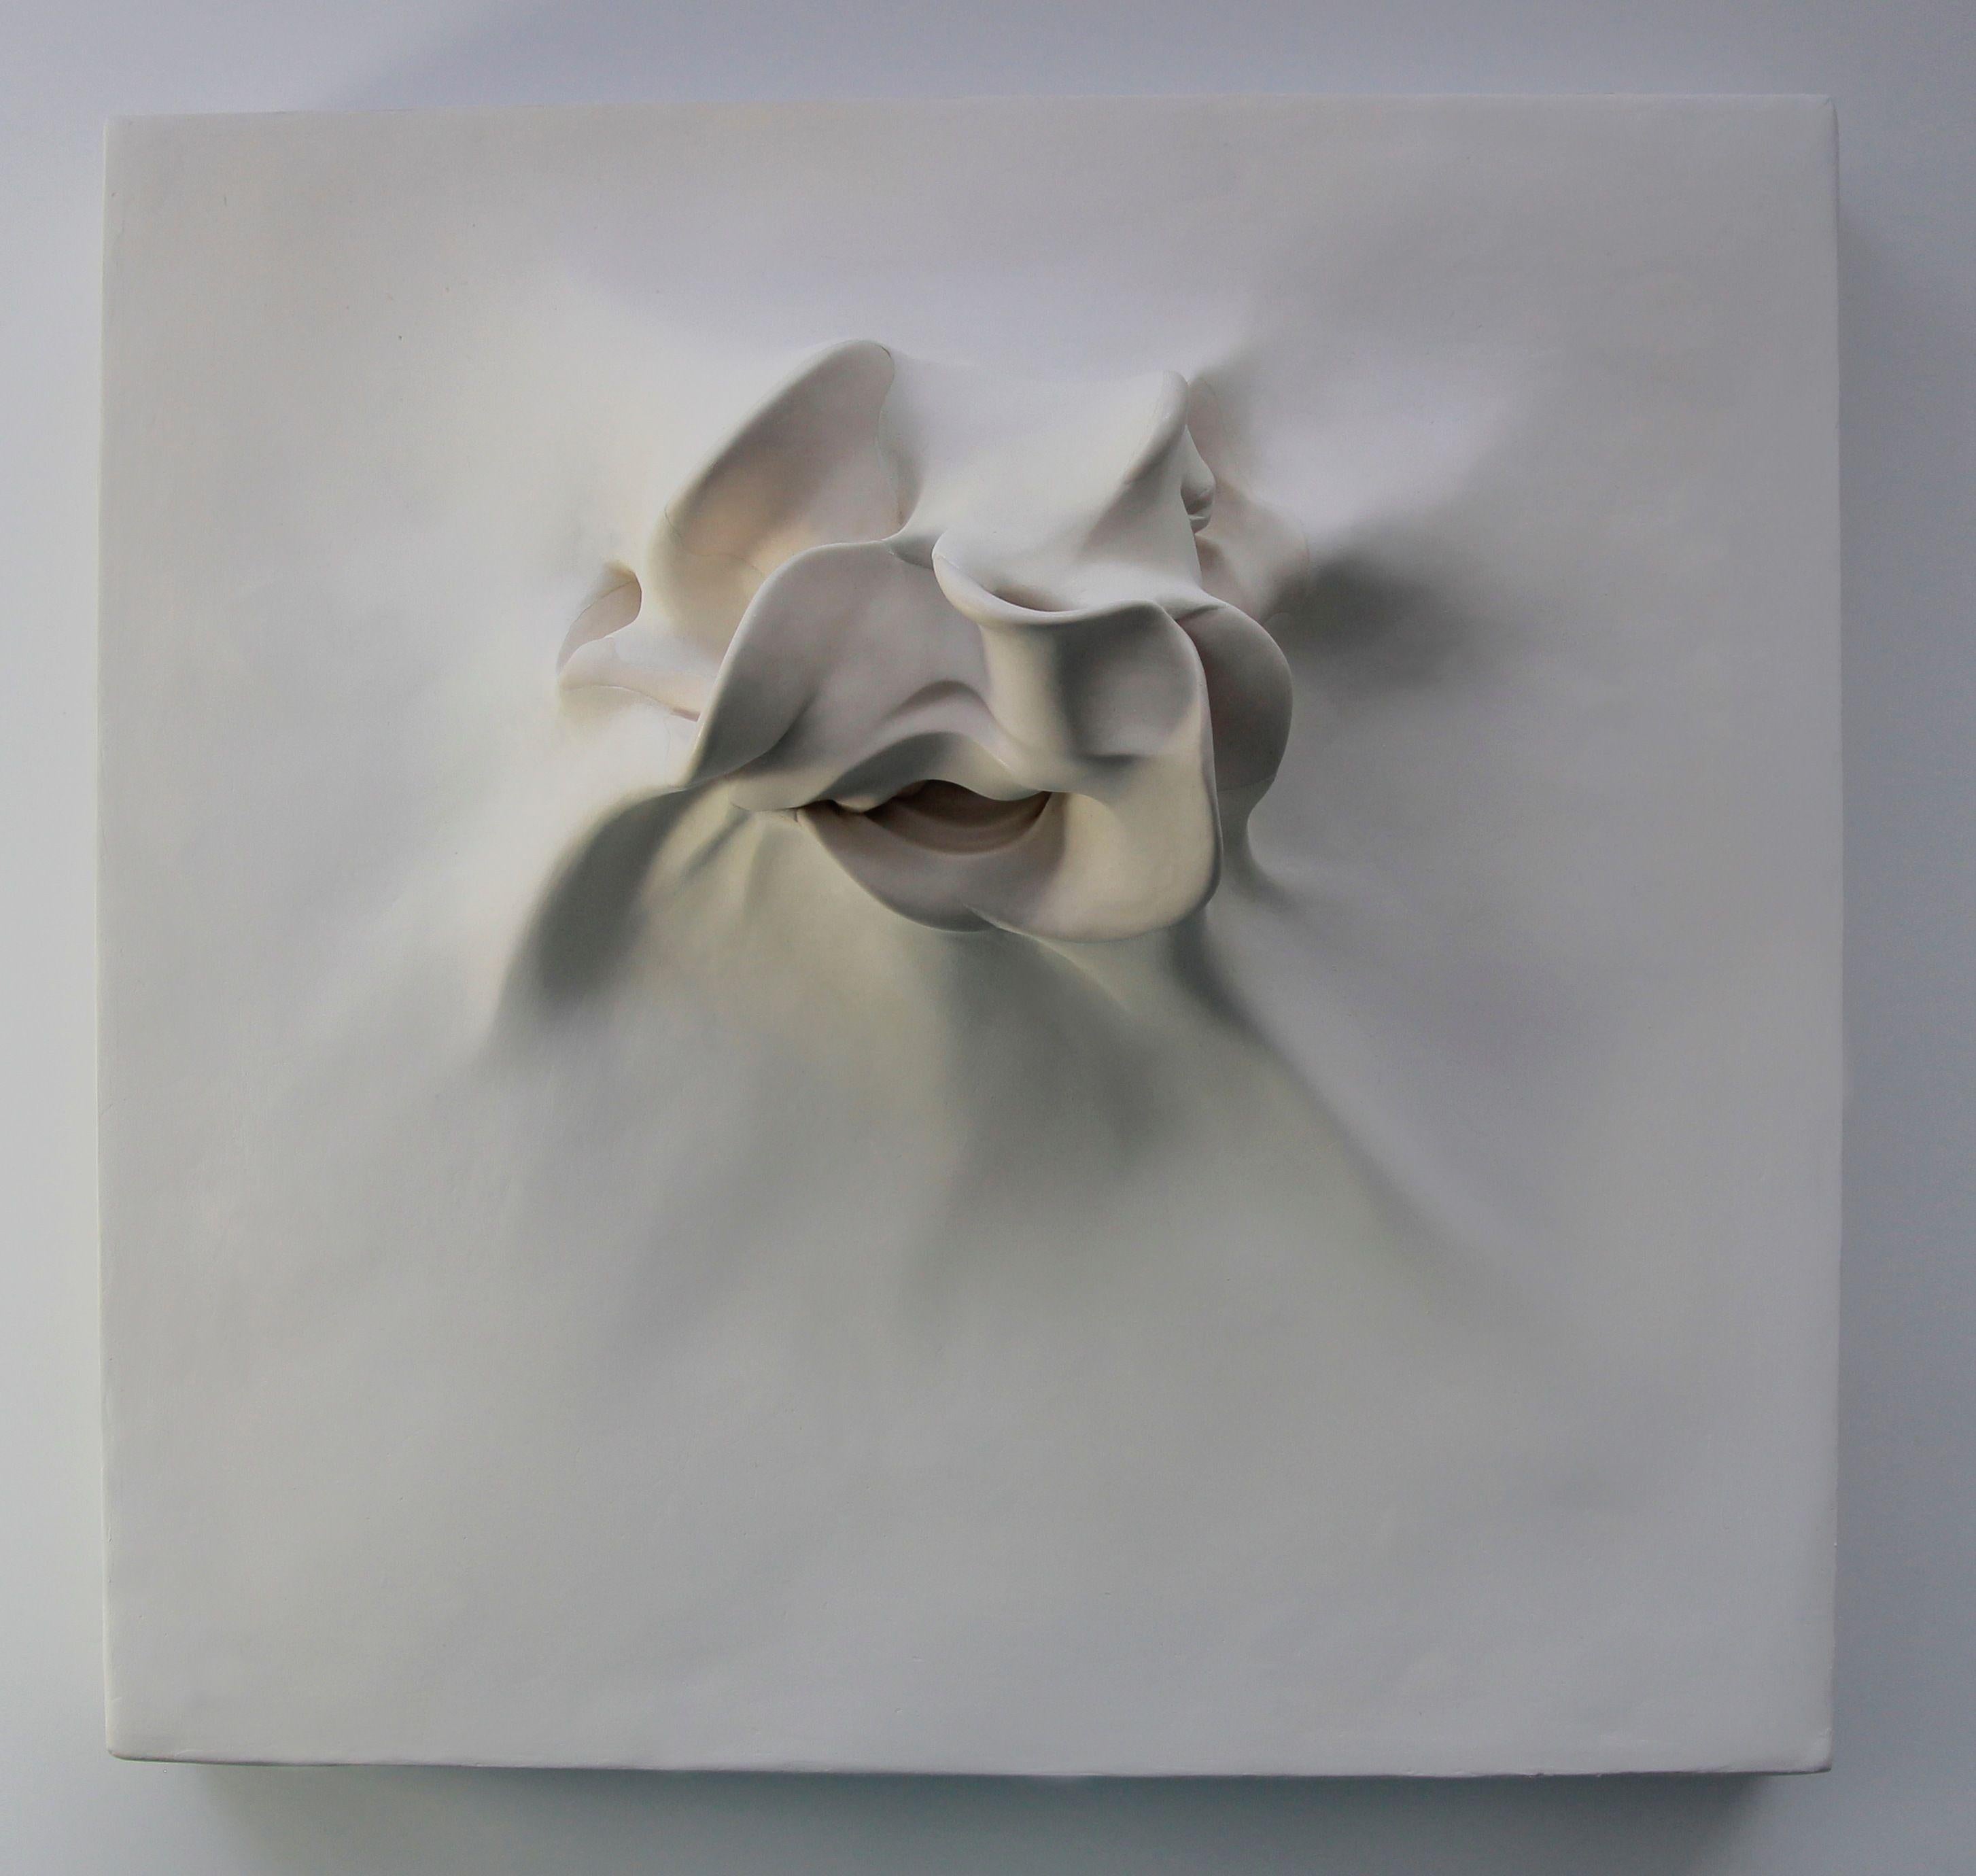 Emergence 2 by Sharon Brill - Wall sculpture, mixed media, ceramic, square